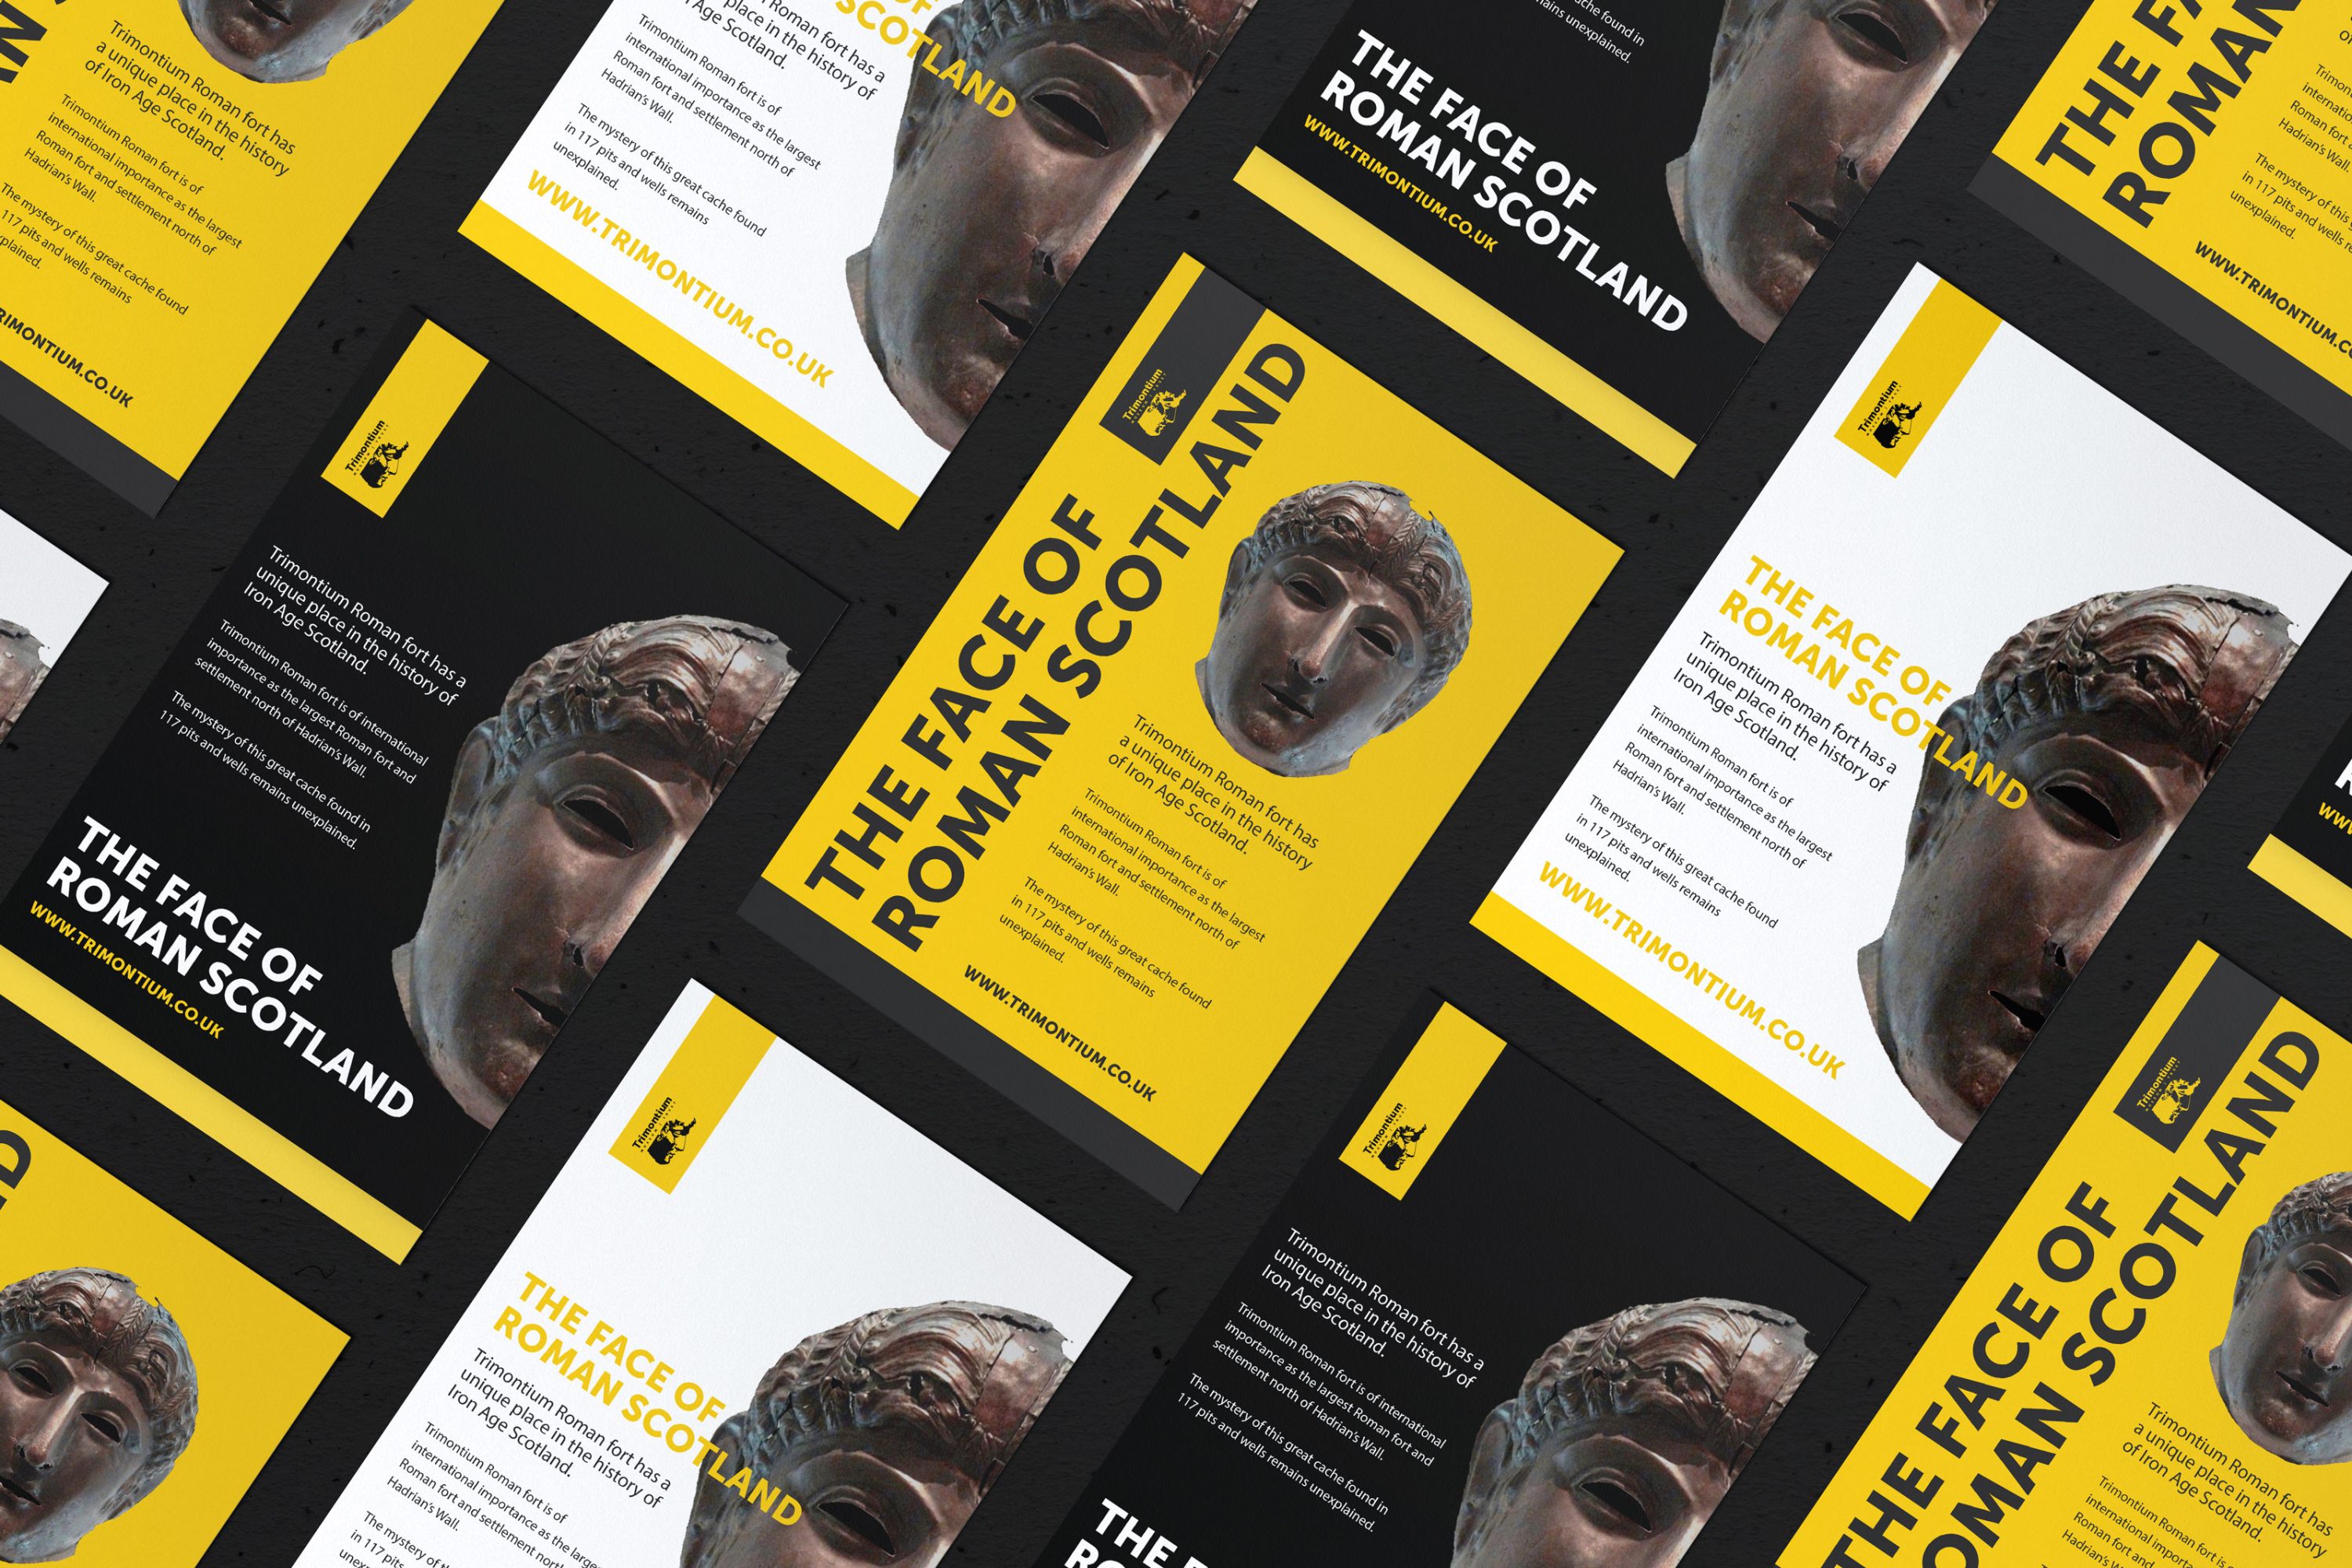 Print leaflet and flyer design example for Trimontium Museum Trust, by Web Design, Branding and Digital Agency, Creatomatic